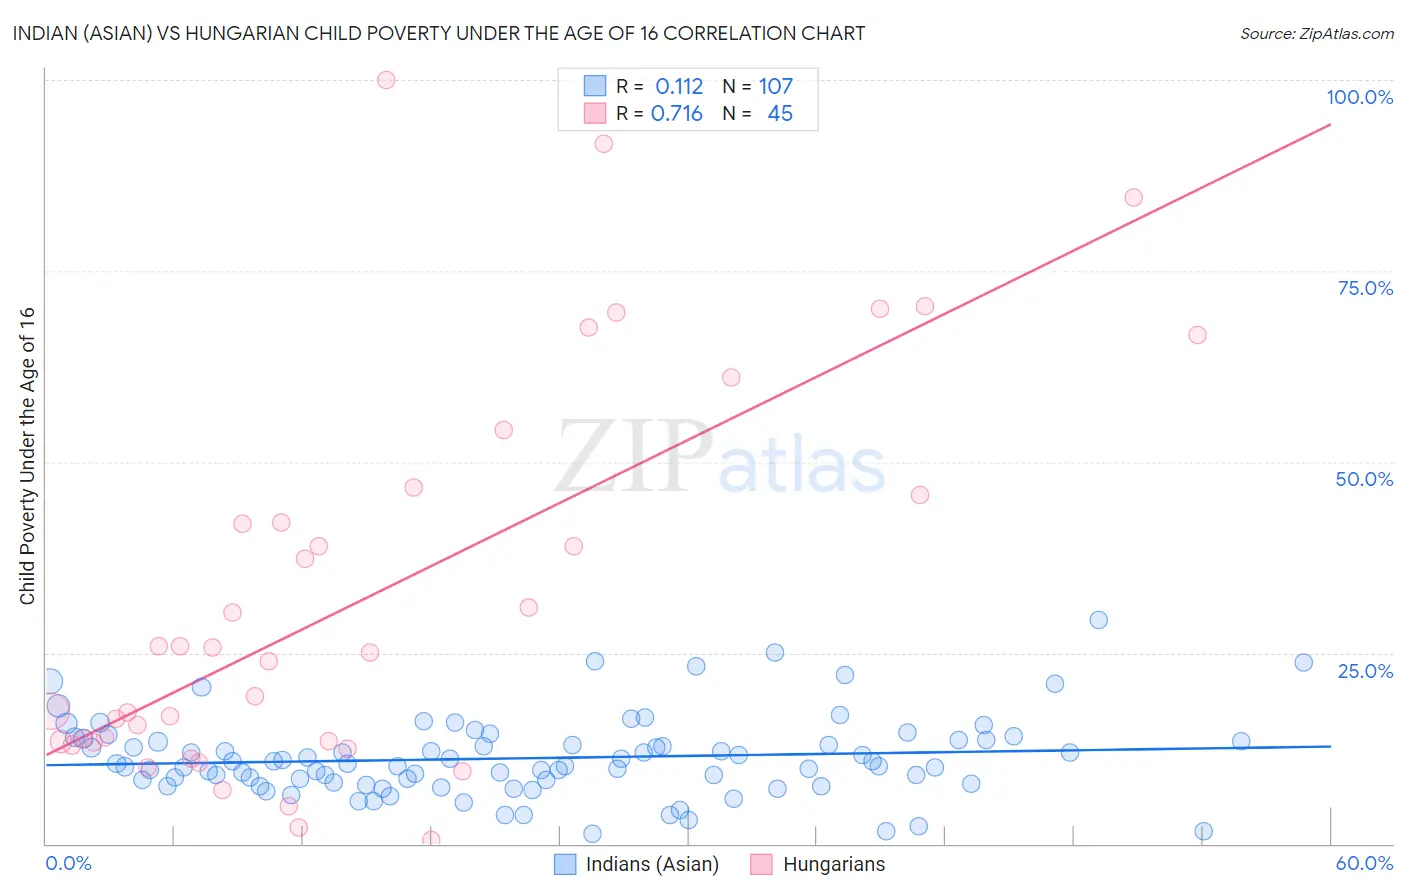 Indian (Asian) vs Hungarian Child Poverty Under the Age of 16